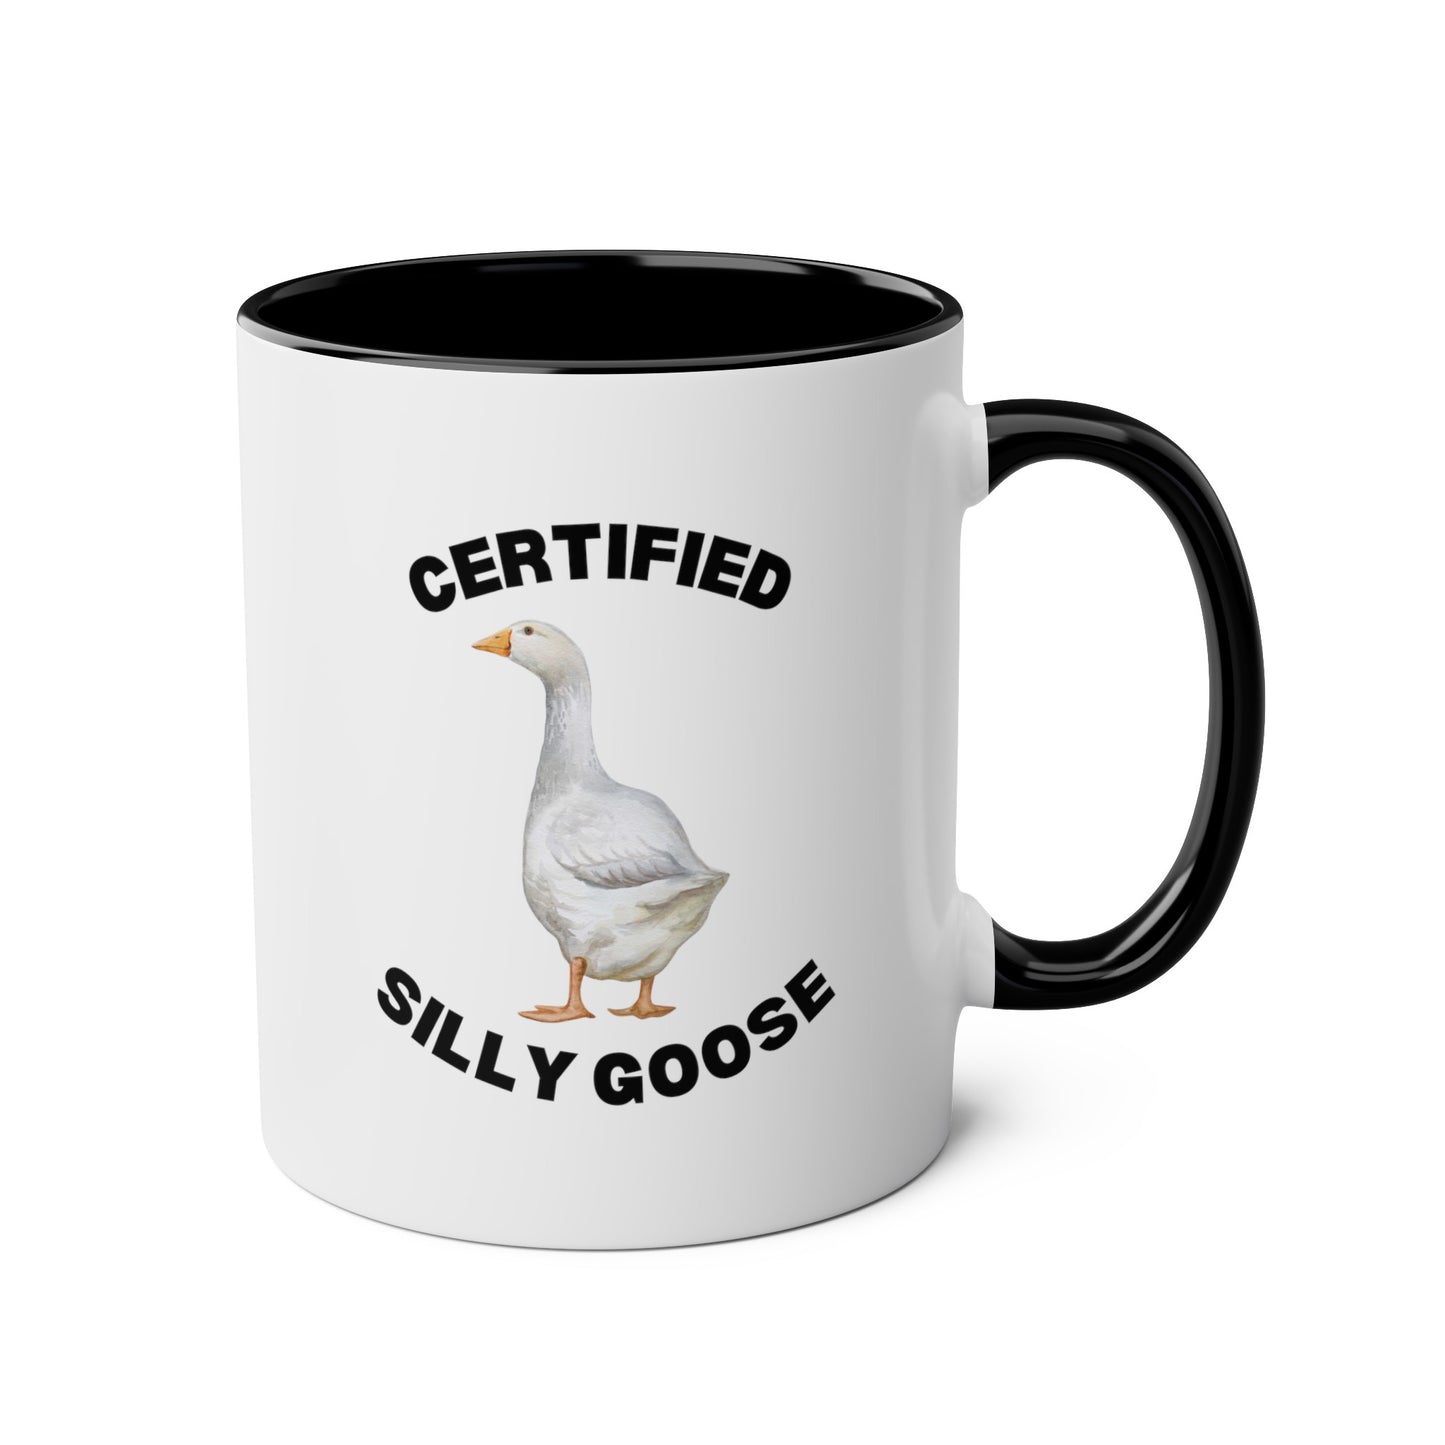 Certified Silly Goose 11oz white with black accent funny large coffee mug gift for best friend sibling meme novelty geese lover waveywares wavey wares wavywares wavy wares